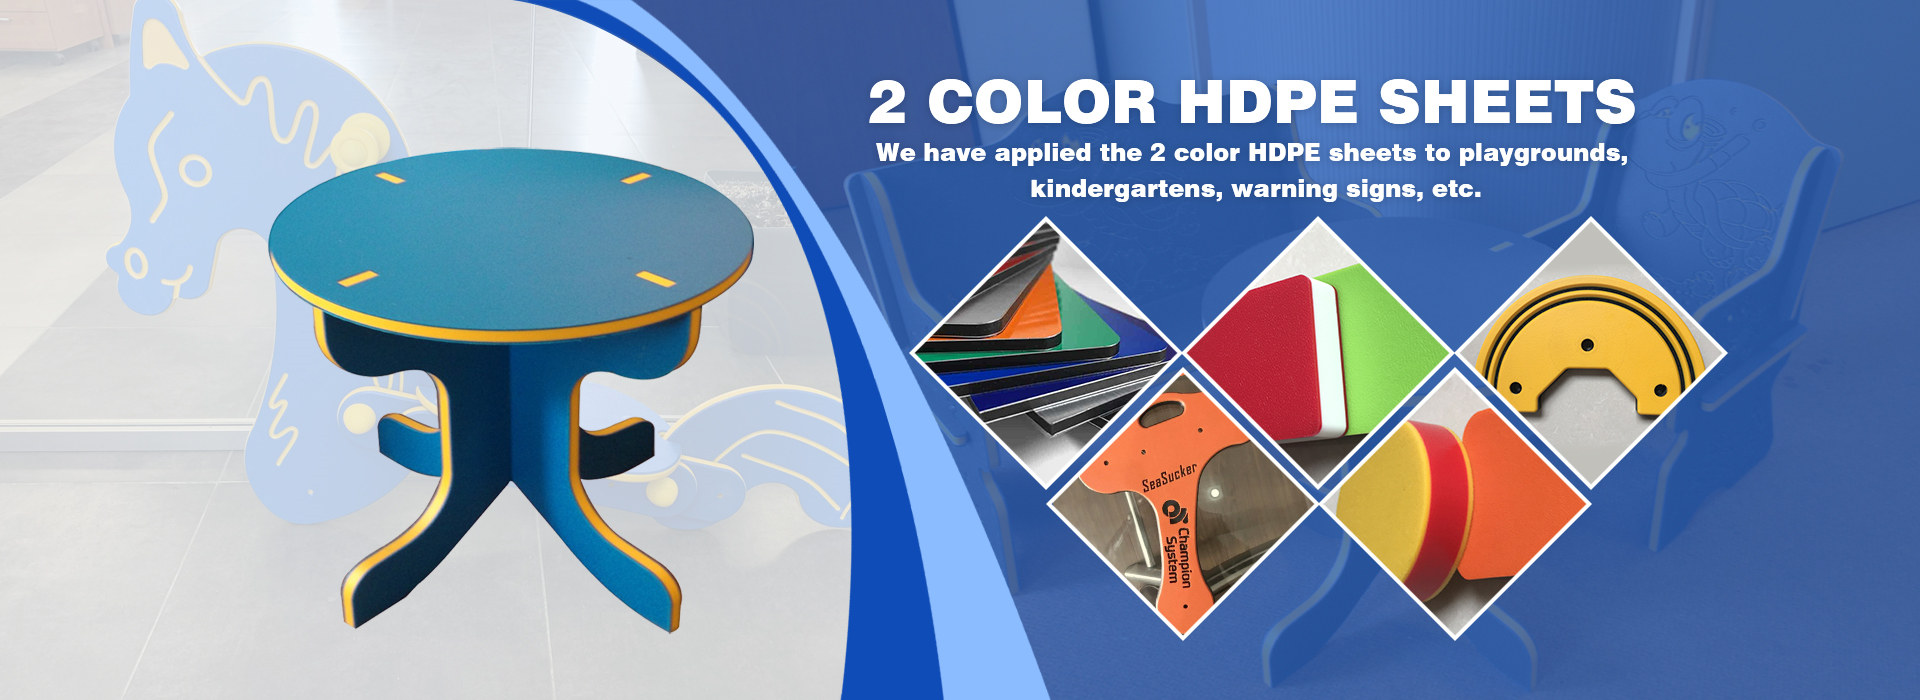 2 color HDPE sheets